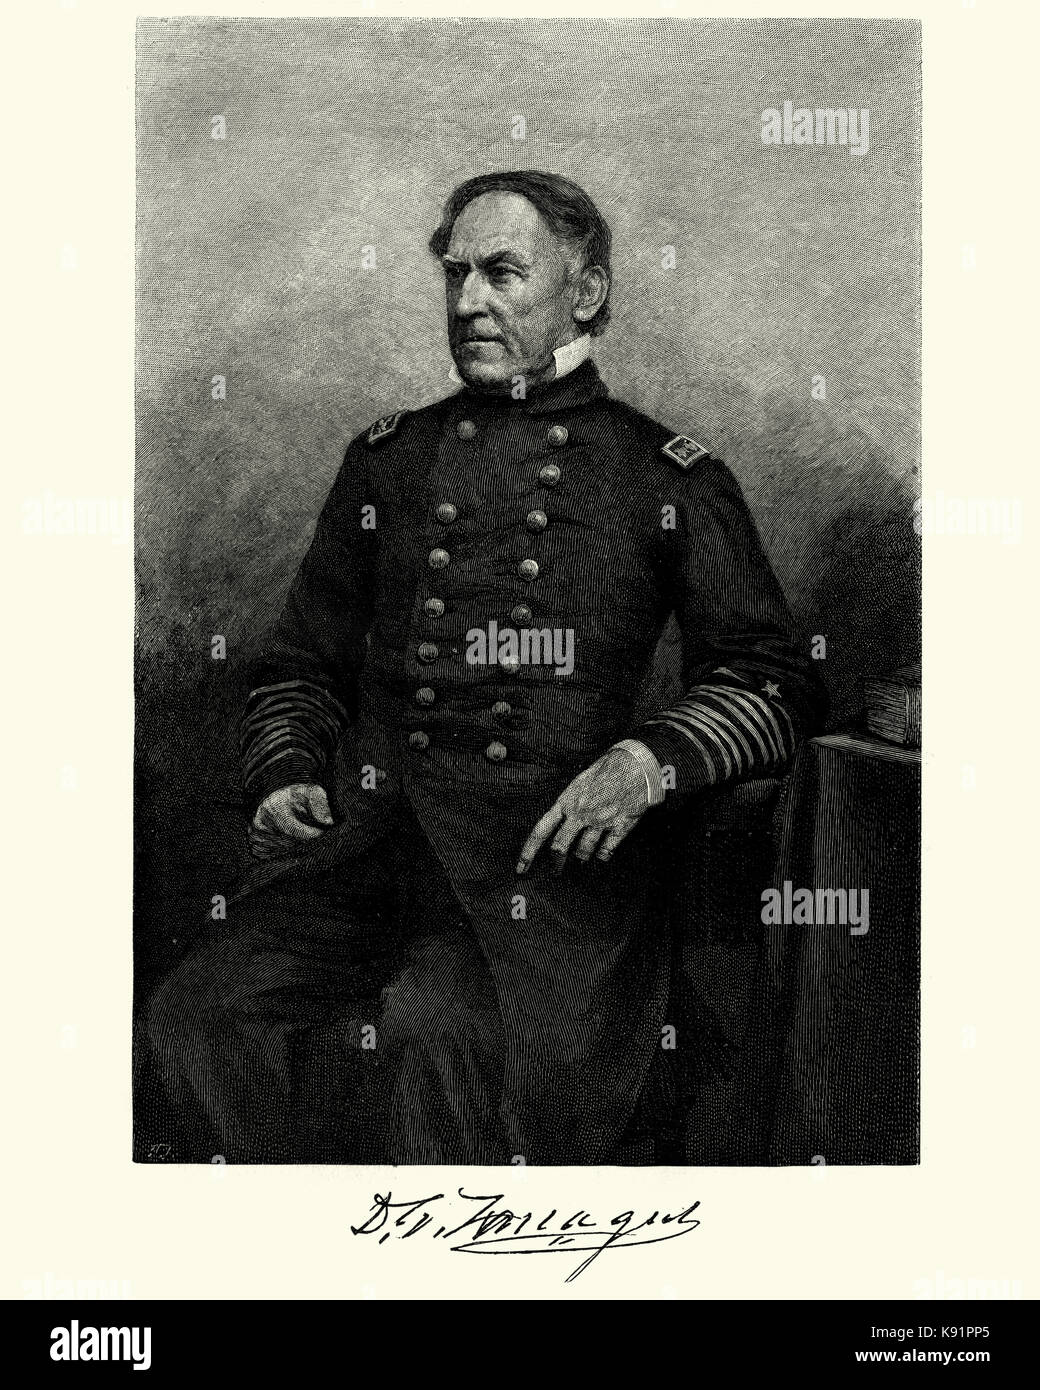 Vintage engraving of David Farragut (1801 to August 14, 1870) was a flag officer of the United States Navy during the American Civil War. Stock Photo